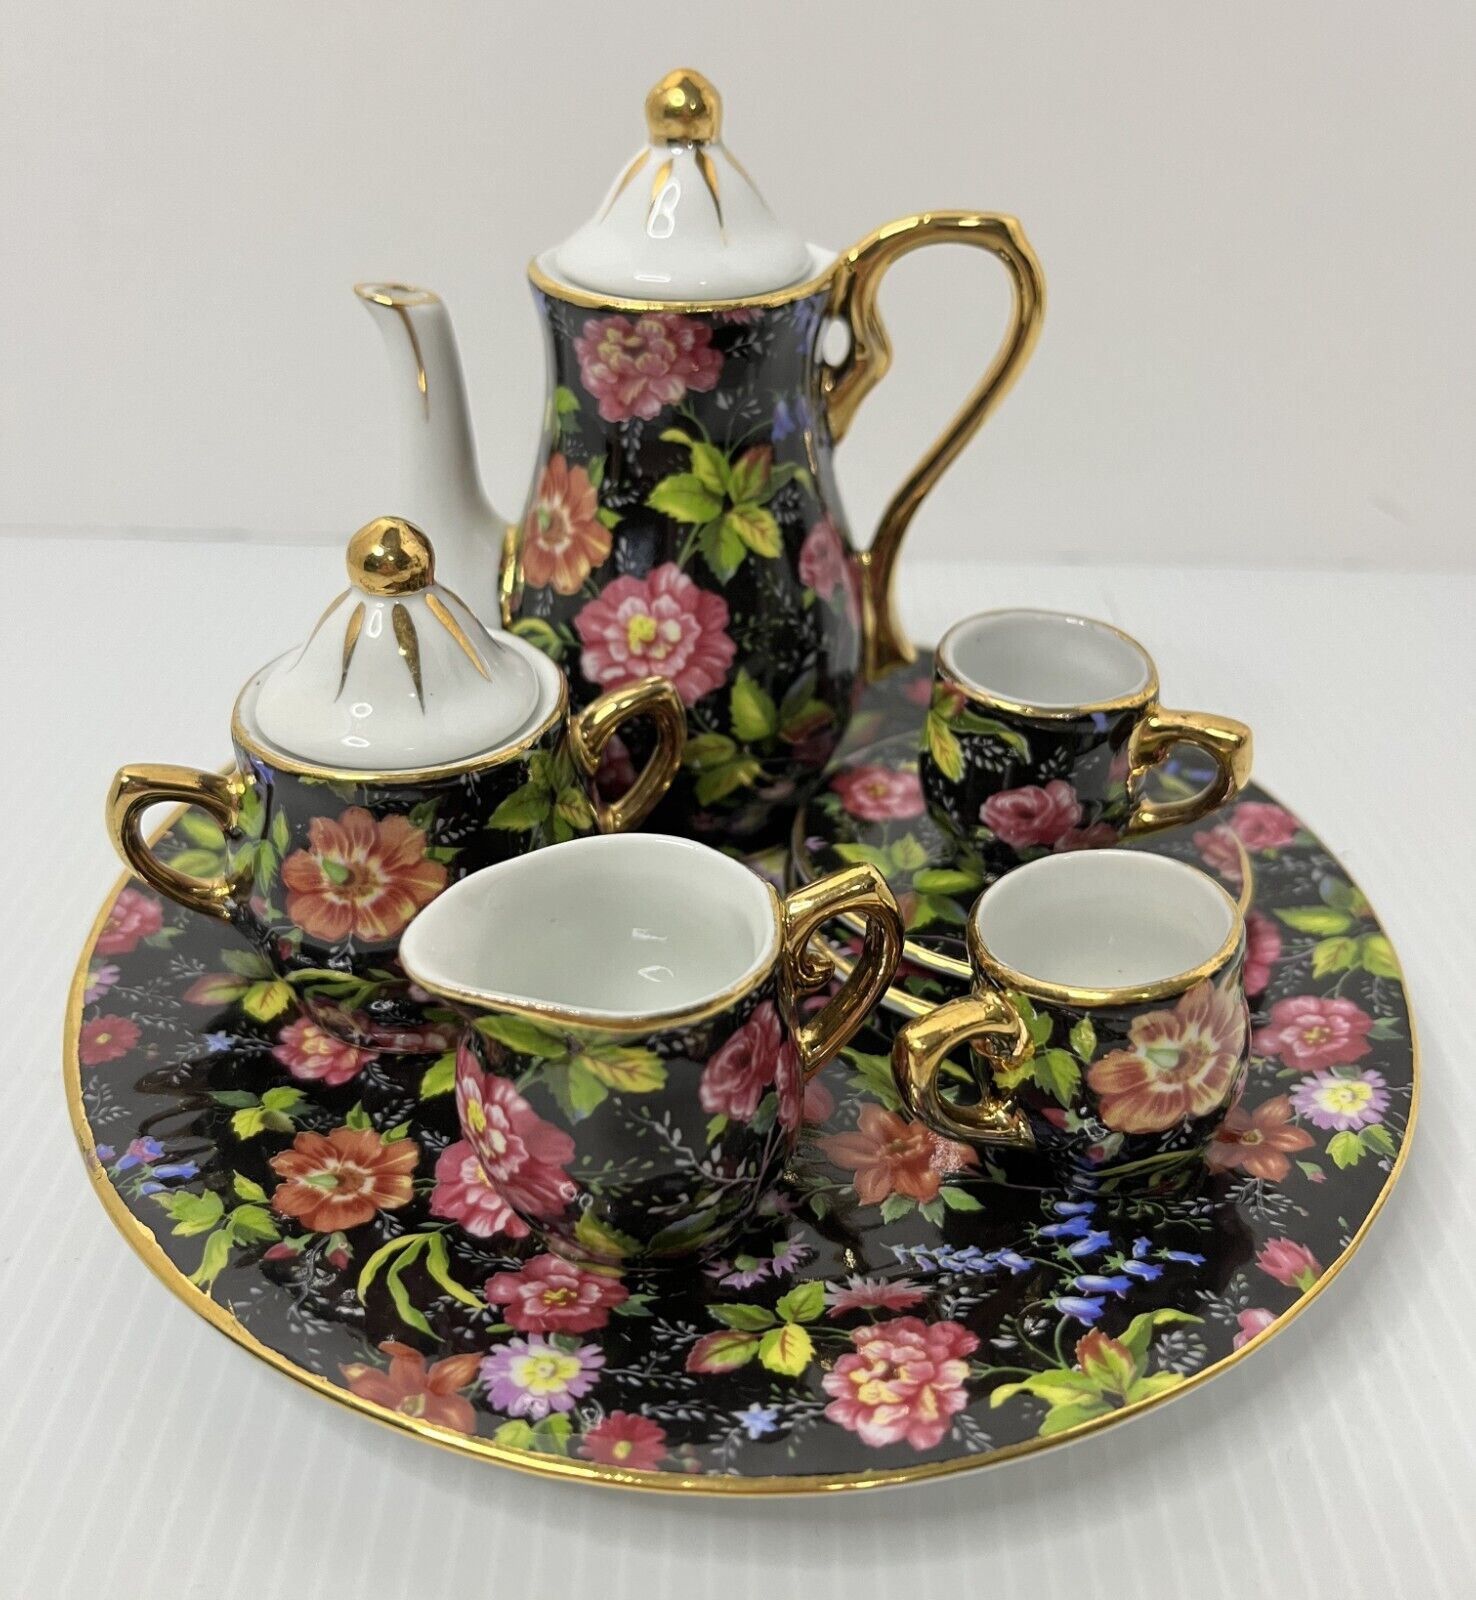 Miniature 10-Pc Floral Ceramic Tea Set w/Large Plate - Not for food/drink use